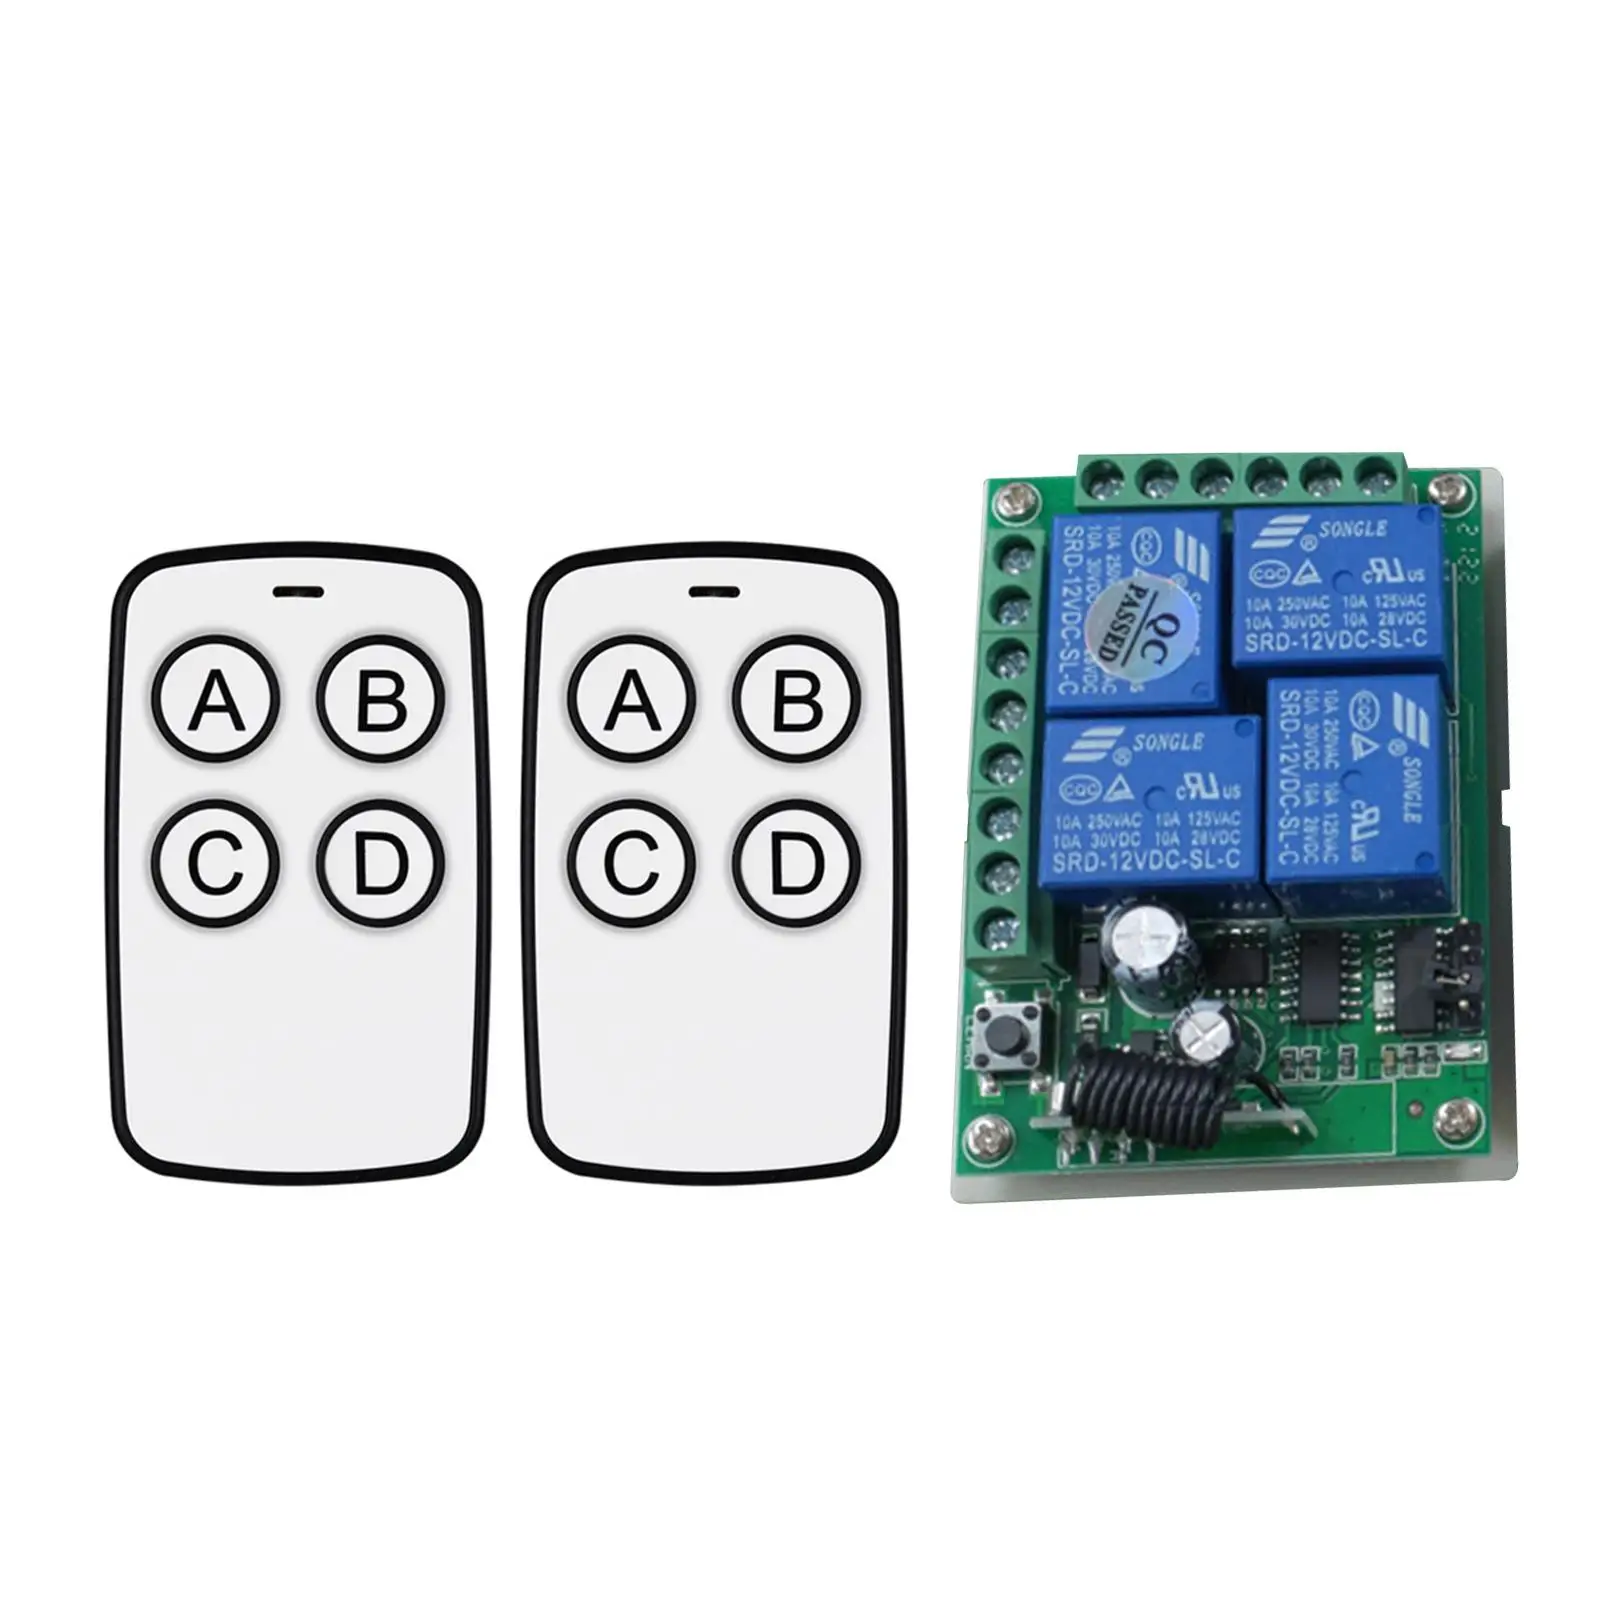 Controller Switch 4 Remote Control Switch for Lights Cars Truck Tailgate